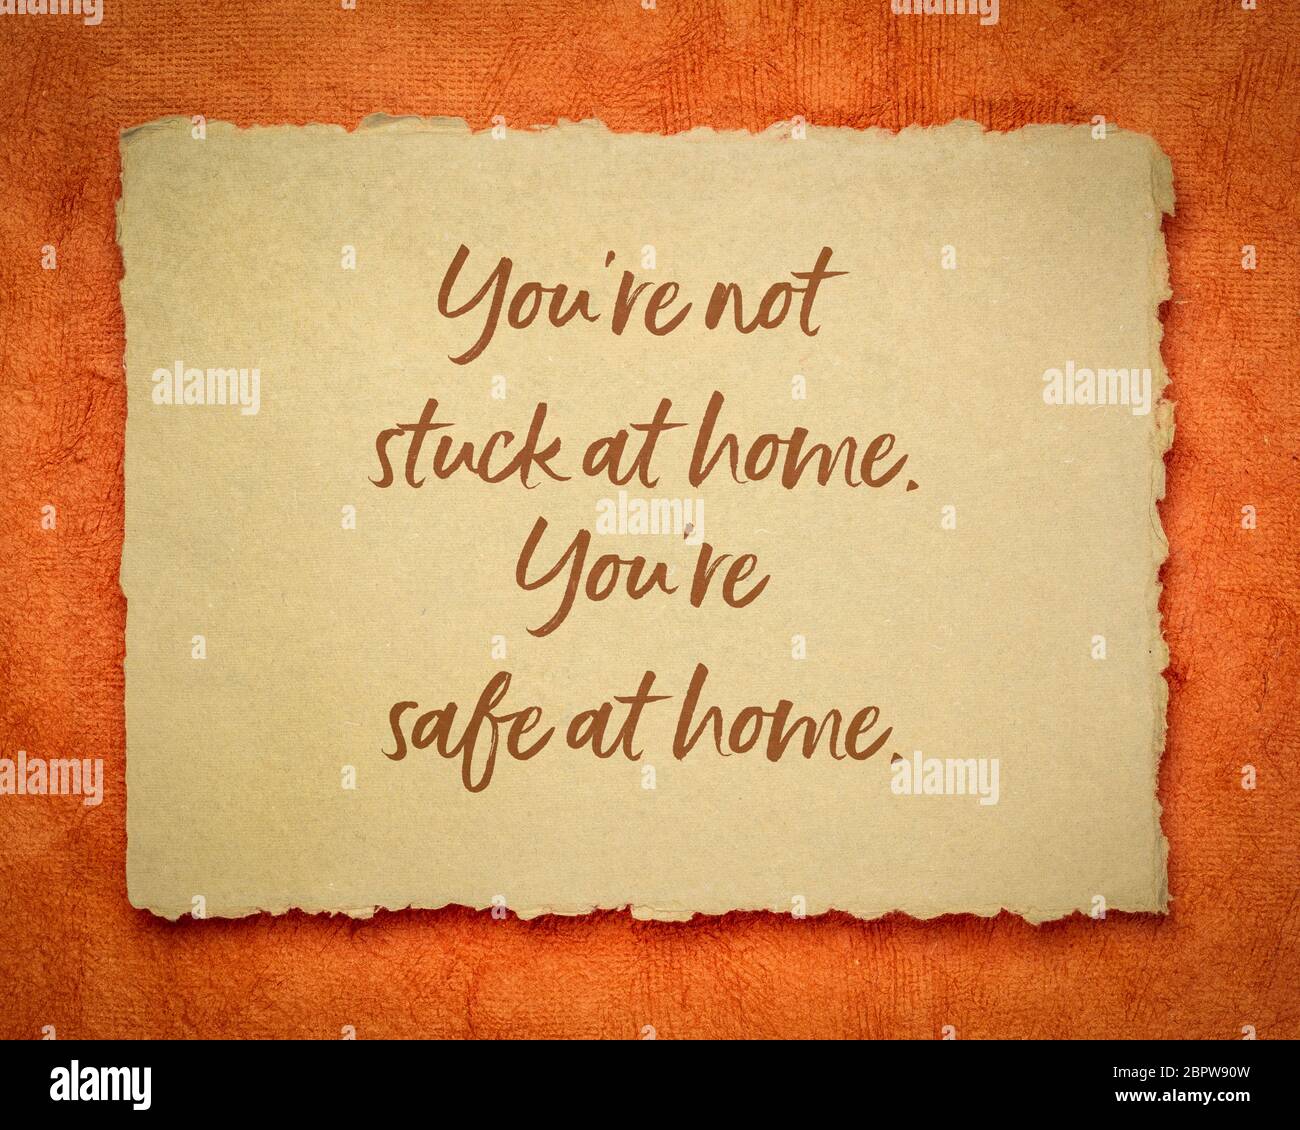 you are not stuck at home, you are safe at home - inspirational note on a handmade rag paper, reminder for self isolation or quarantine during coronav Stock Photo